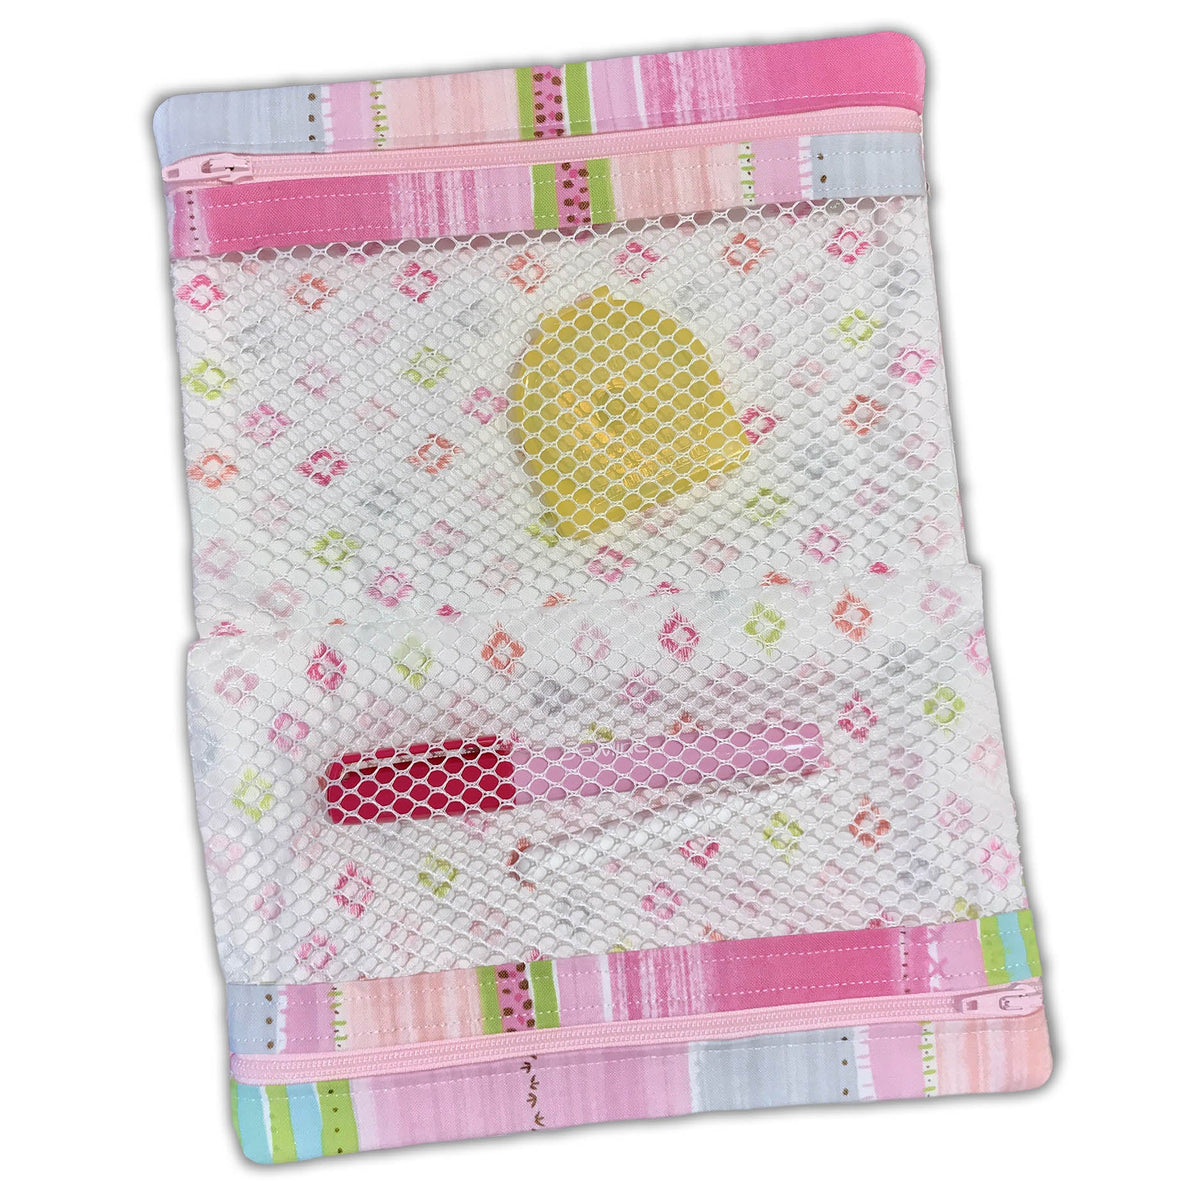 Twice as Nice Mesh Zipper Bags In the Hoop Embroidery Designs: Large Set 